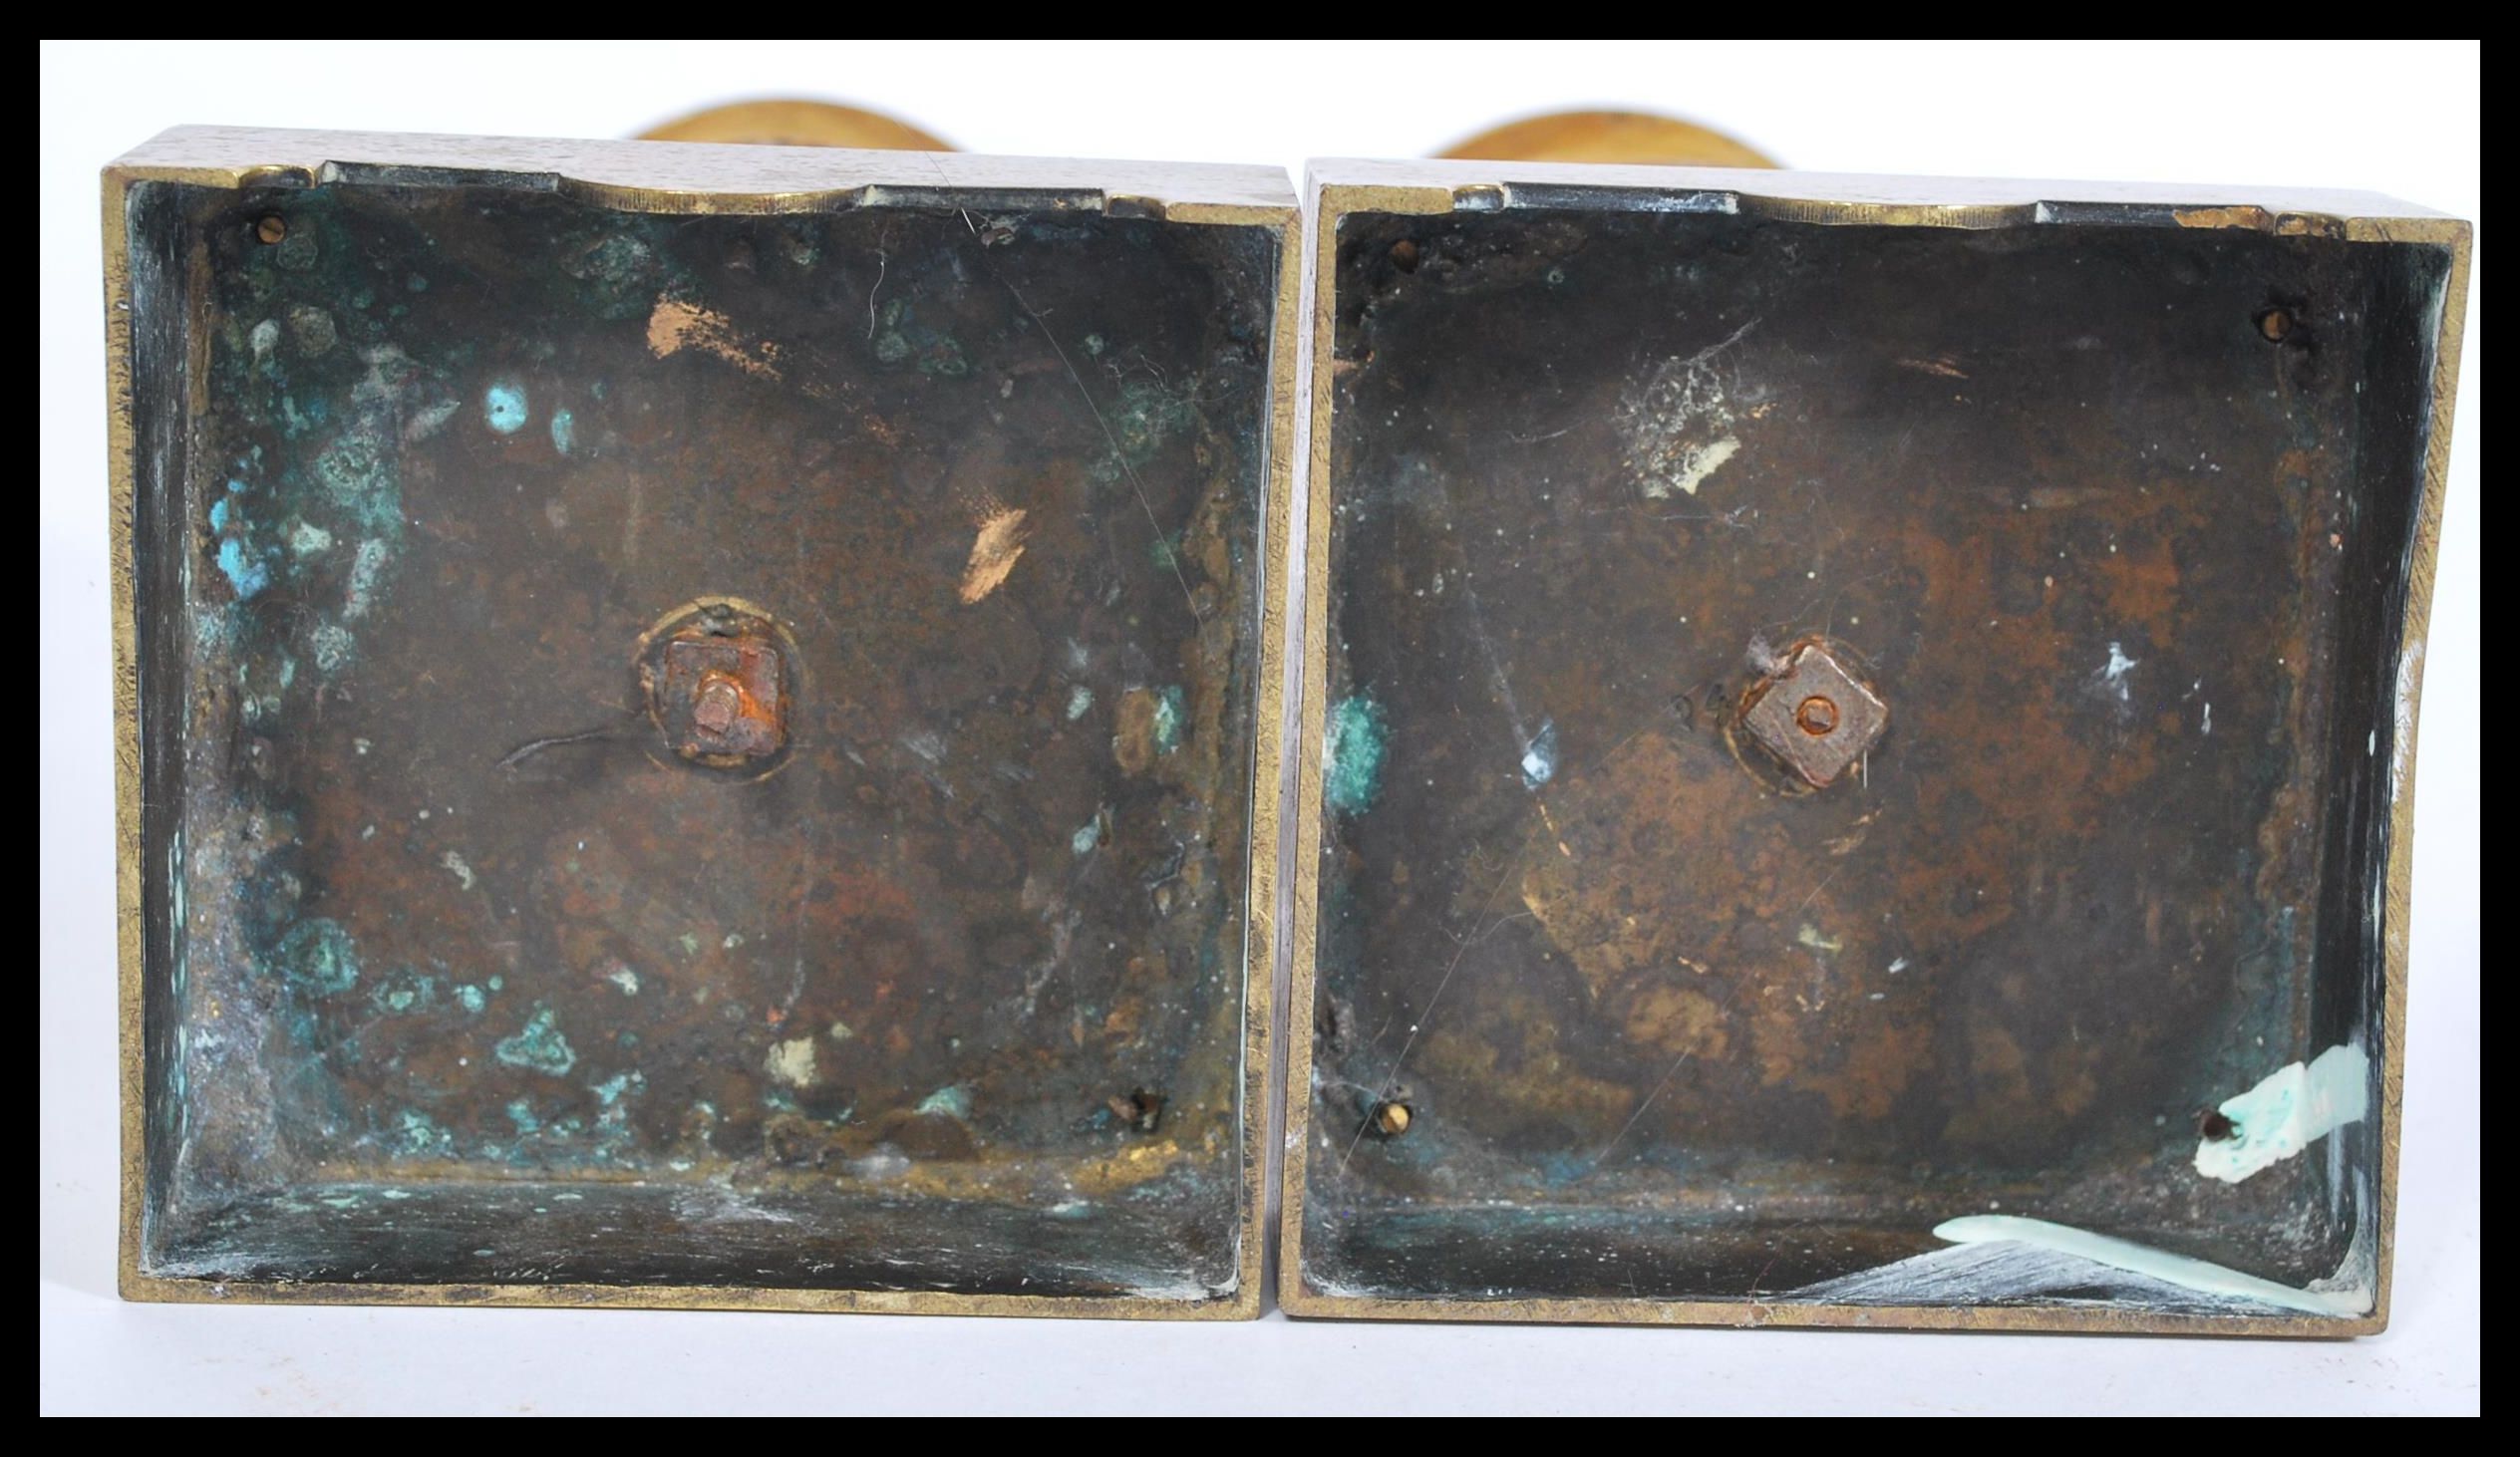 A pair of 19th century bronze urns raised on square bases with decorations of swags and ribbons with - Image 9 of 9